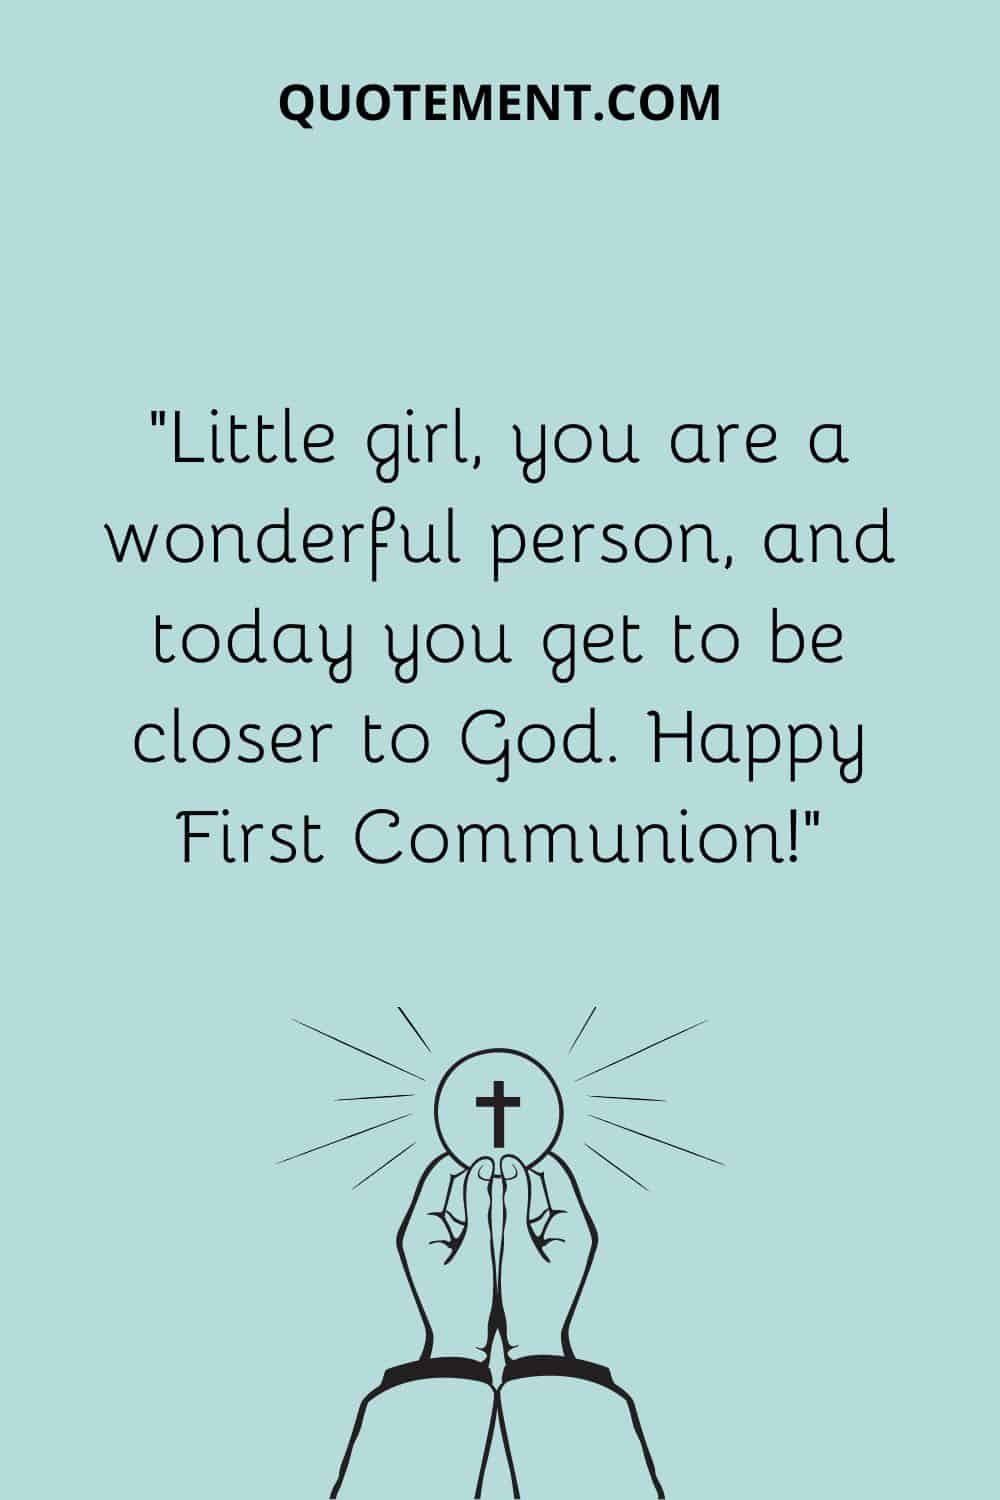 “Little girl, you are a wonderful person, and today you get to be closer to God. Happy First Communion!”